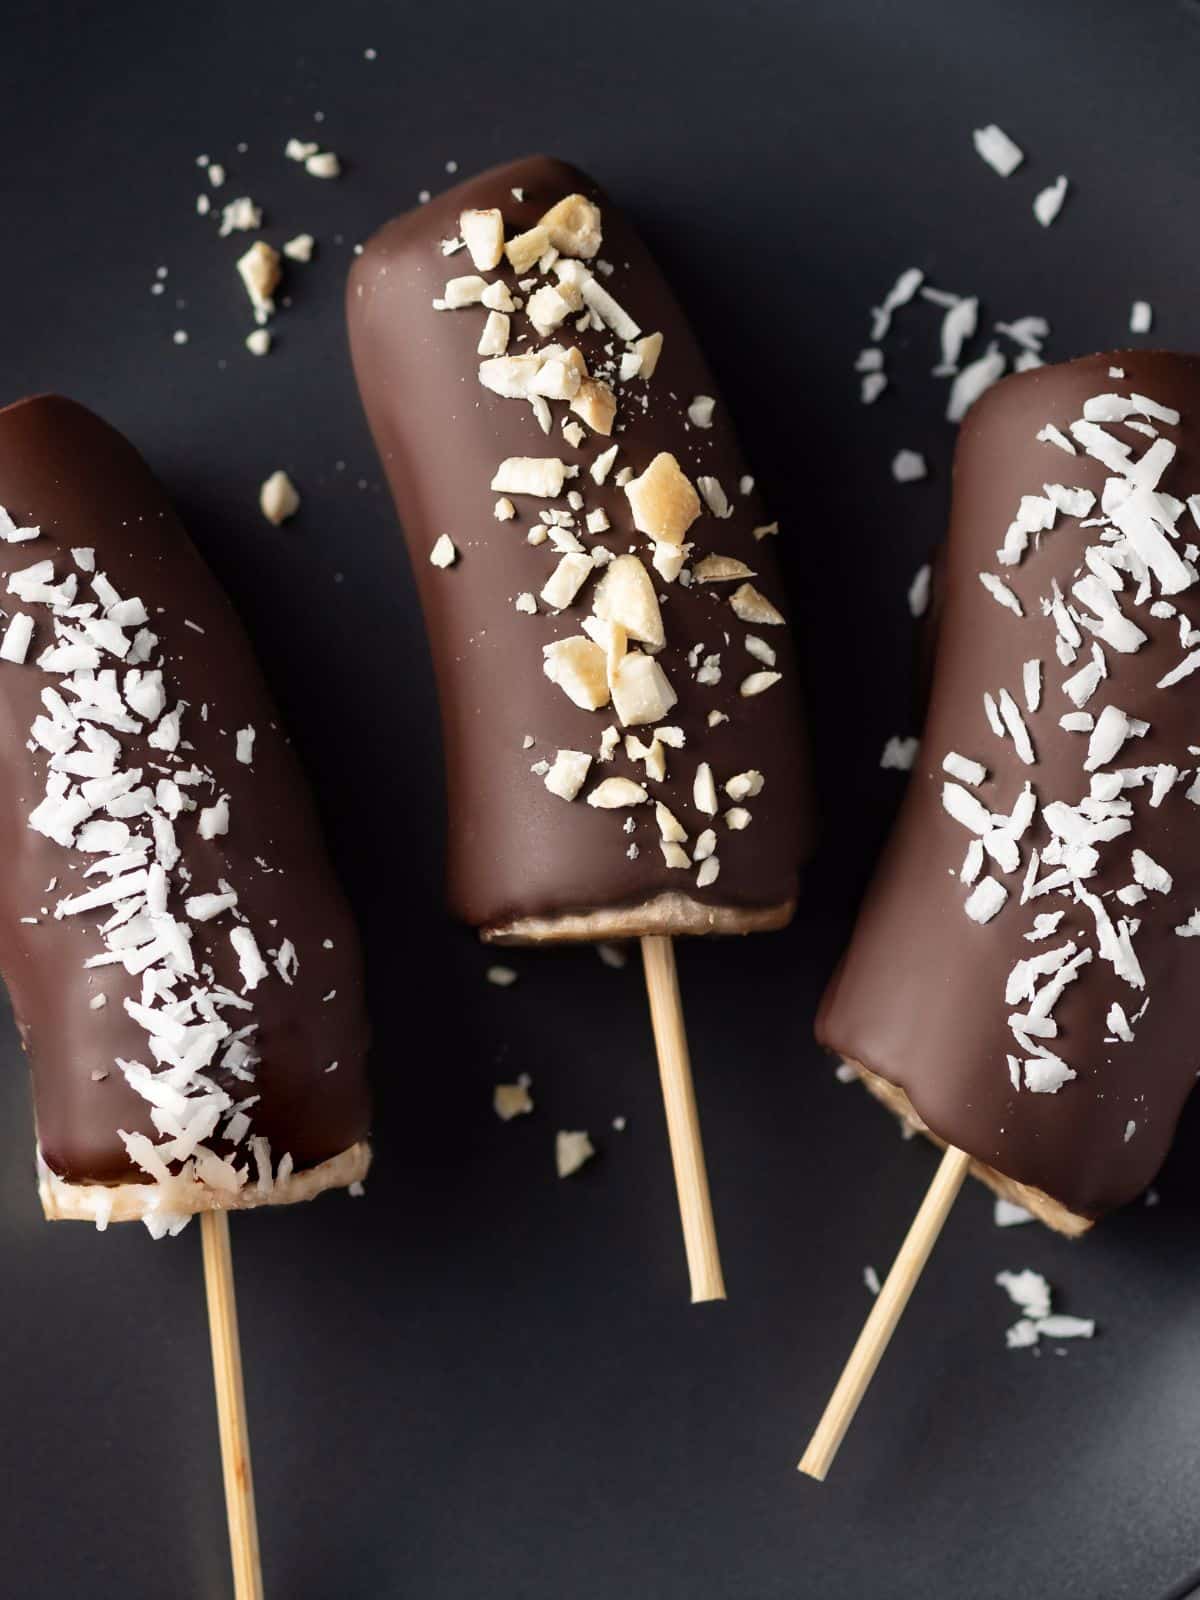 frozen bananas dipped in chocolate.